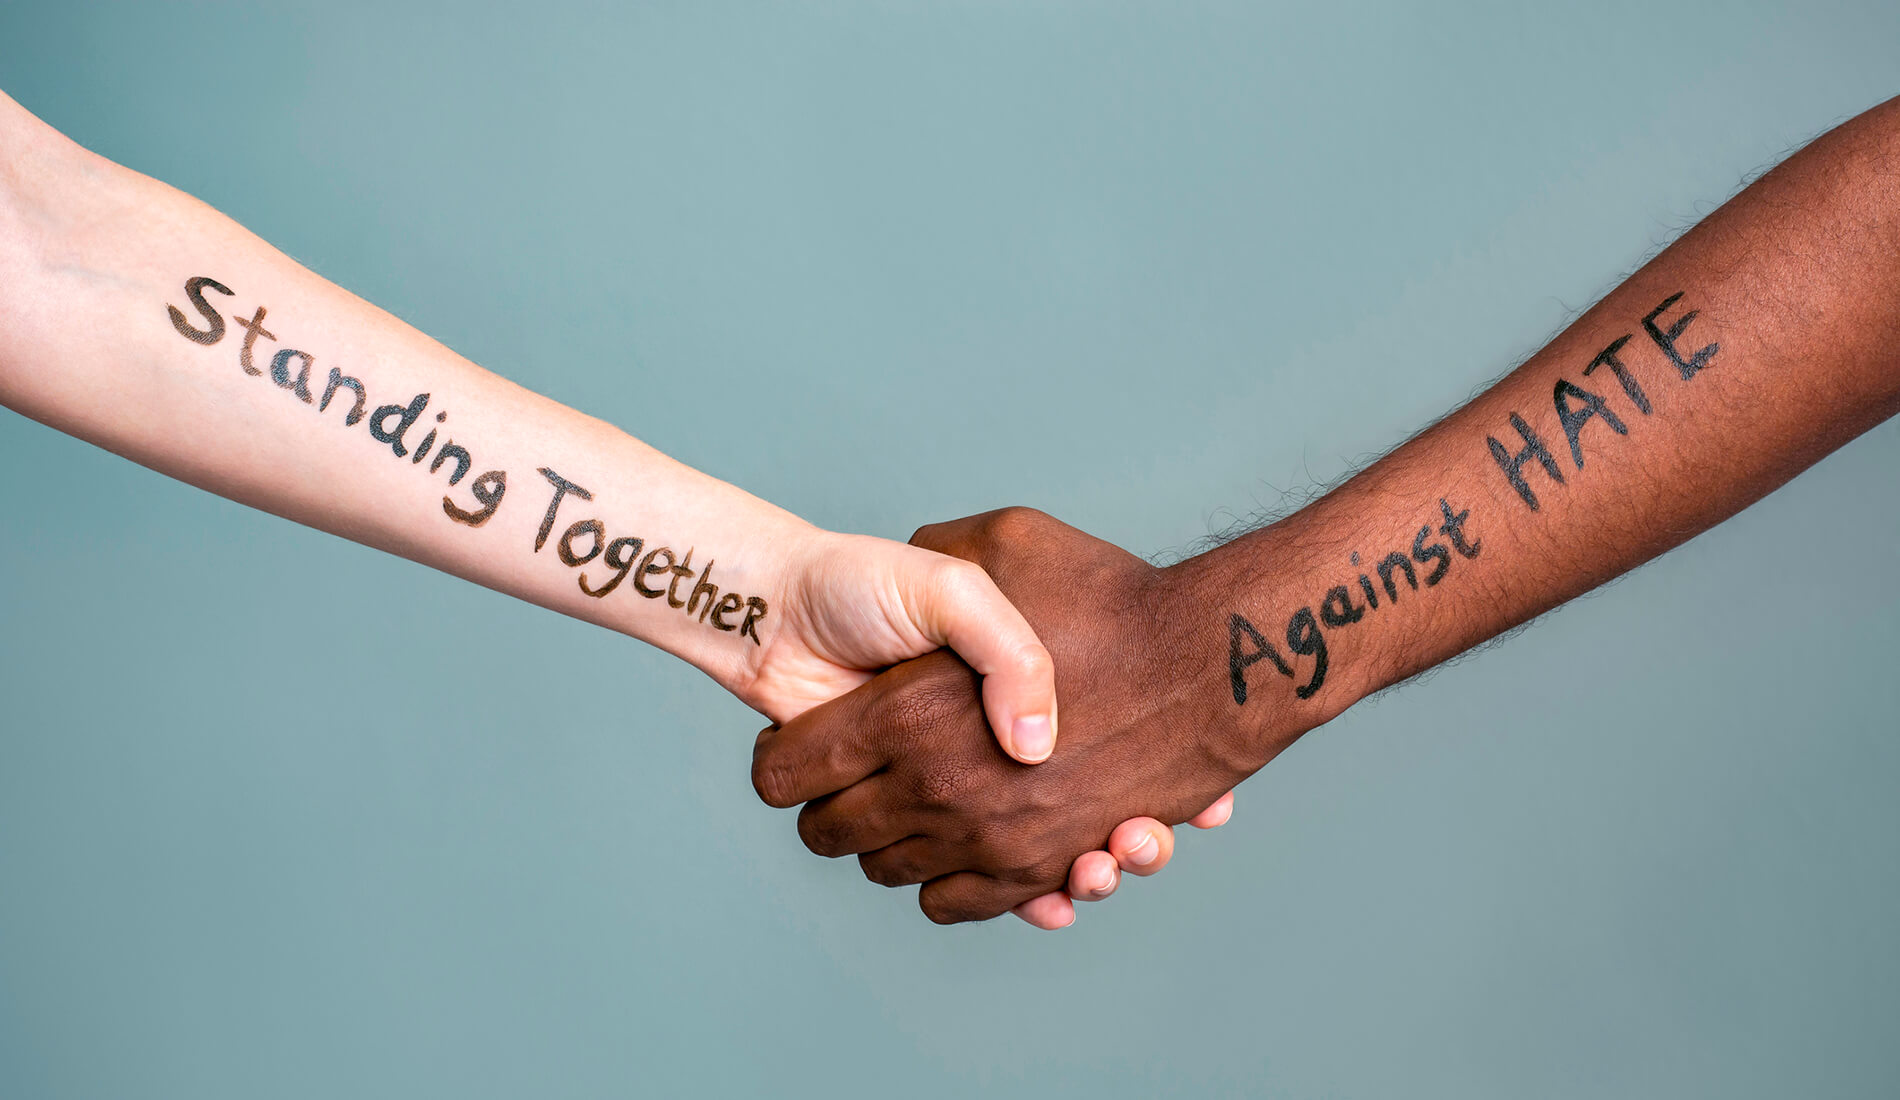 hands clasping, one reads "standing together" and the other reads "against racism"